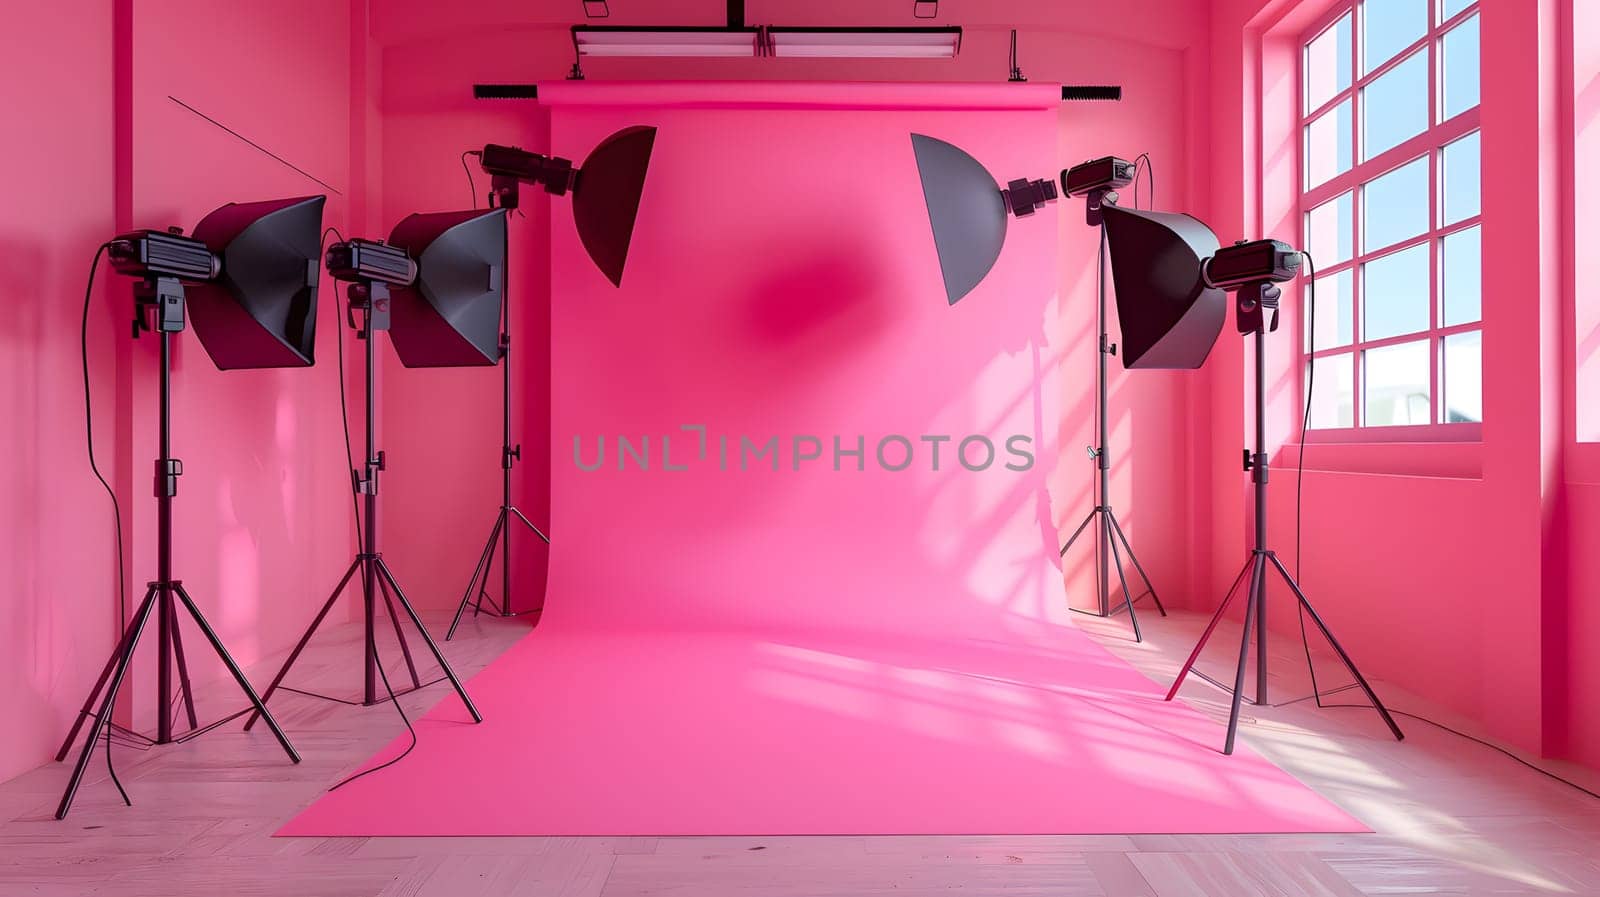 A pink photo studio with a magenta backdrop, hardwood flooring, and a bunch of lights. Includes window for natural lighting, tripod for performance art events